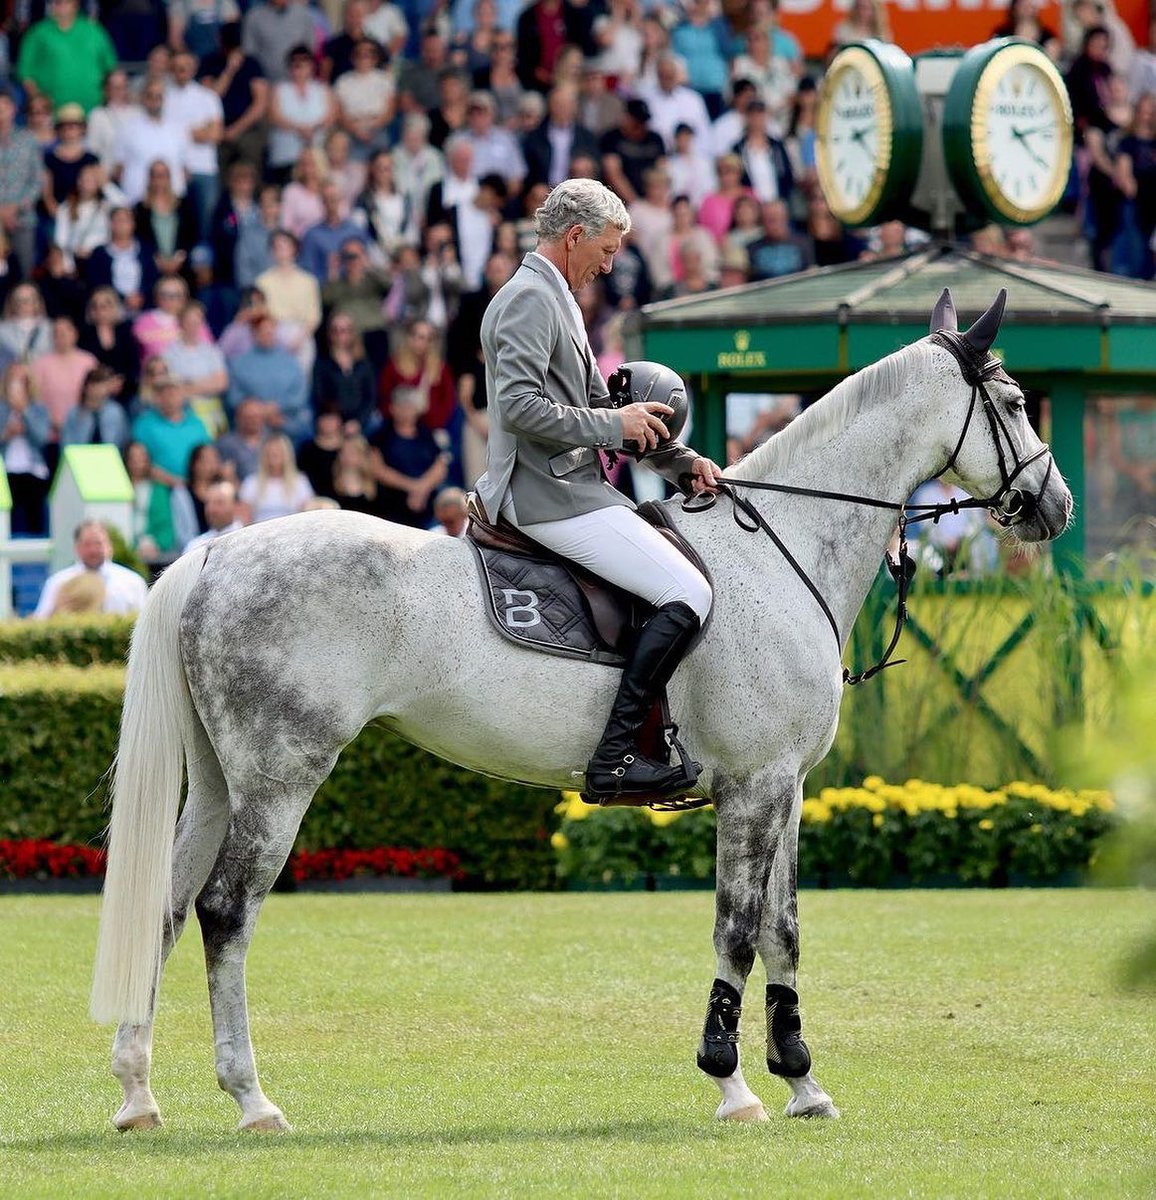 This past Sunday, we watched a legend bid farewell to his competition career on the big stage during the ROLEX Grand Prix at #CHIOAachen 🥹 Ludger, we wish you all the best in your retirement. 💛 #WellingtonInternational

📸 Beerbaum Stables